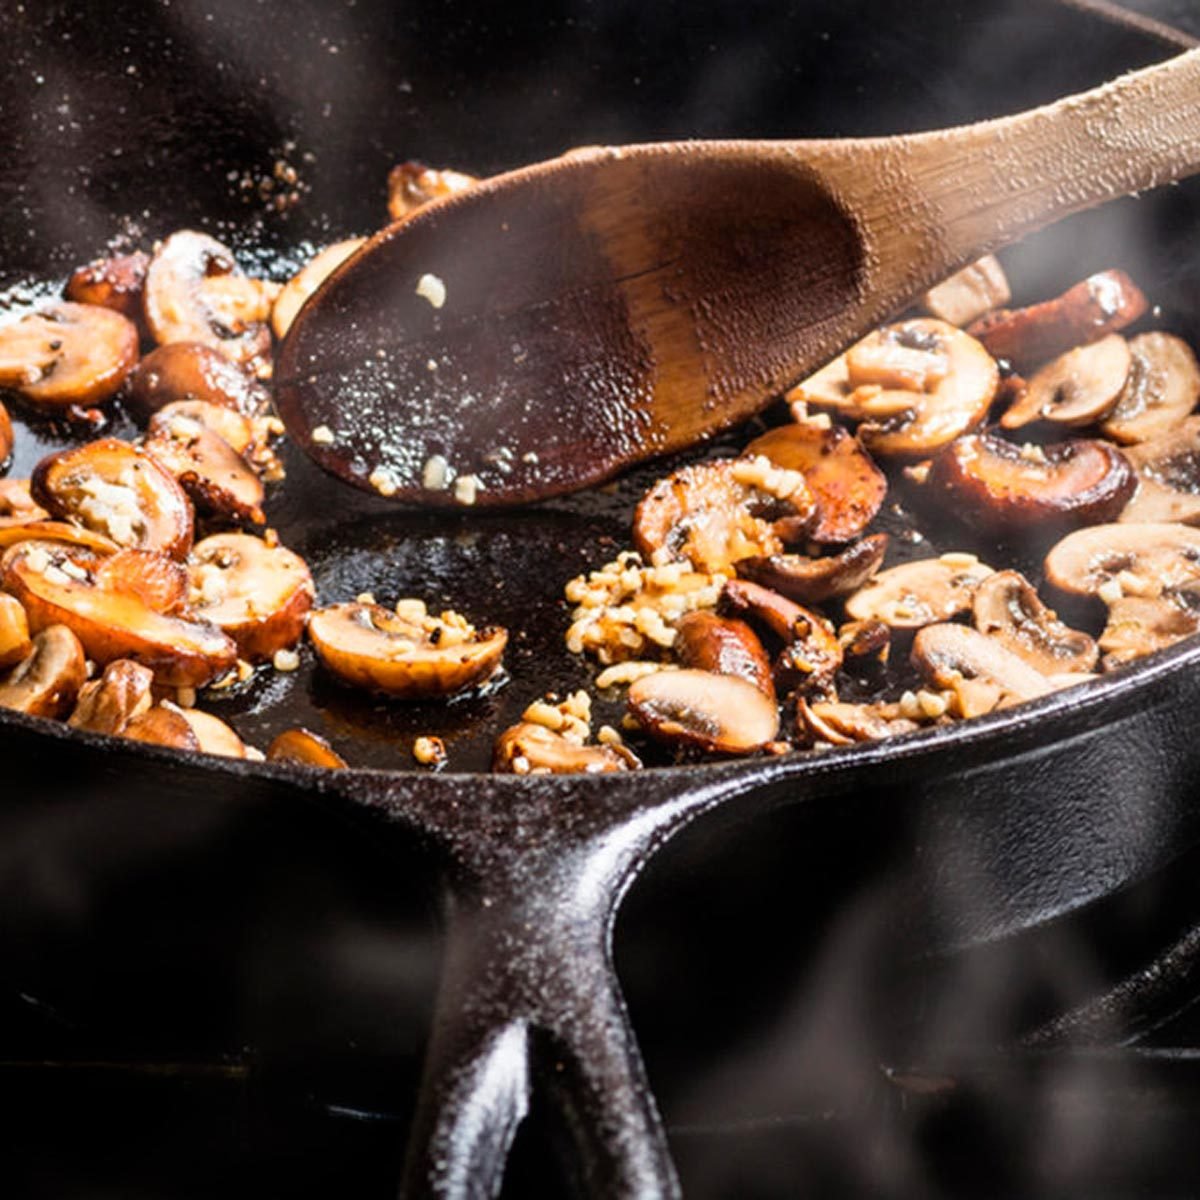 Can you use cast iron on a glass cooktop? 